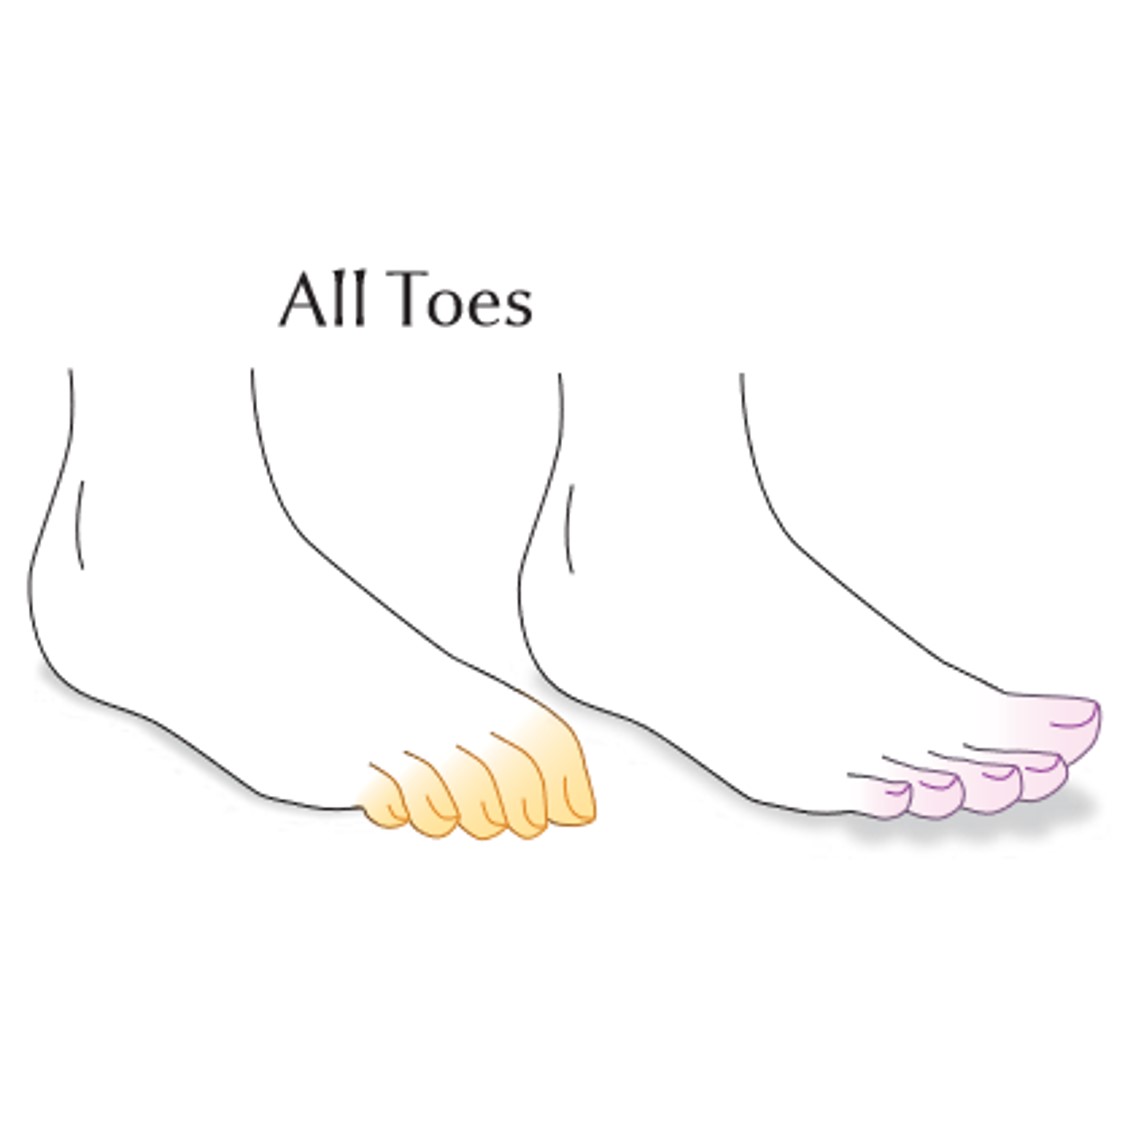 Thumbnail for TicTacToes: Assessing Toe Movements as an Input Modality